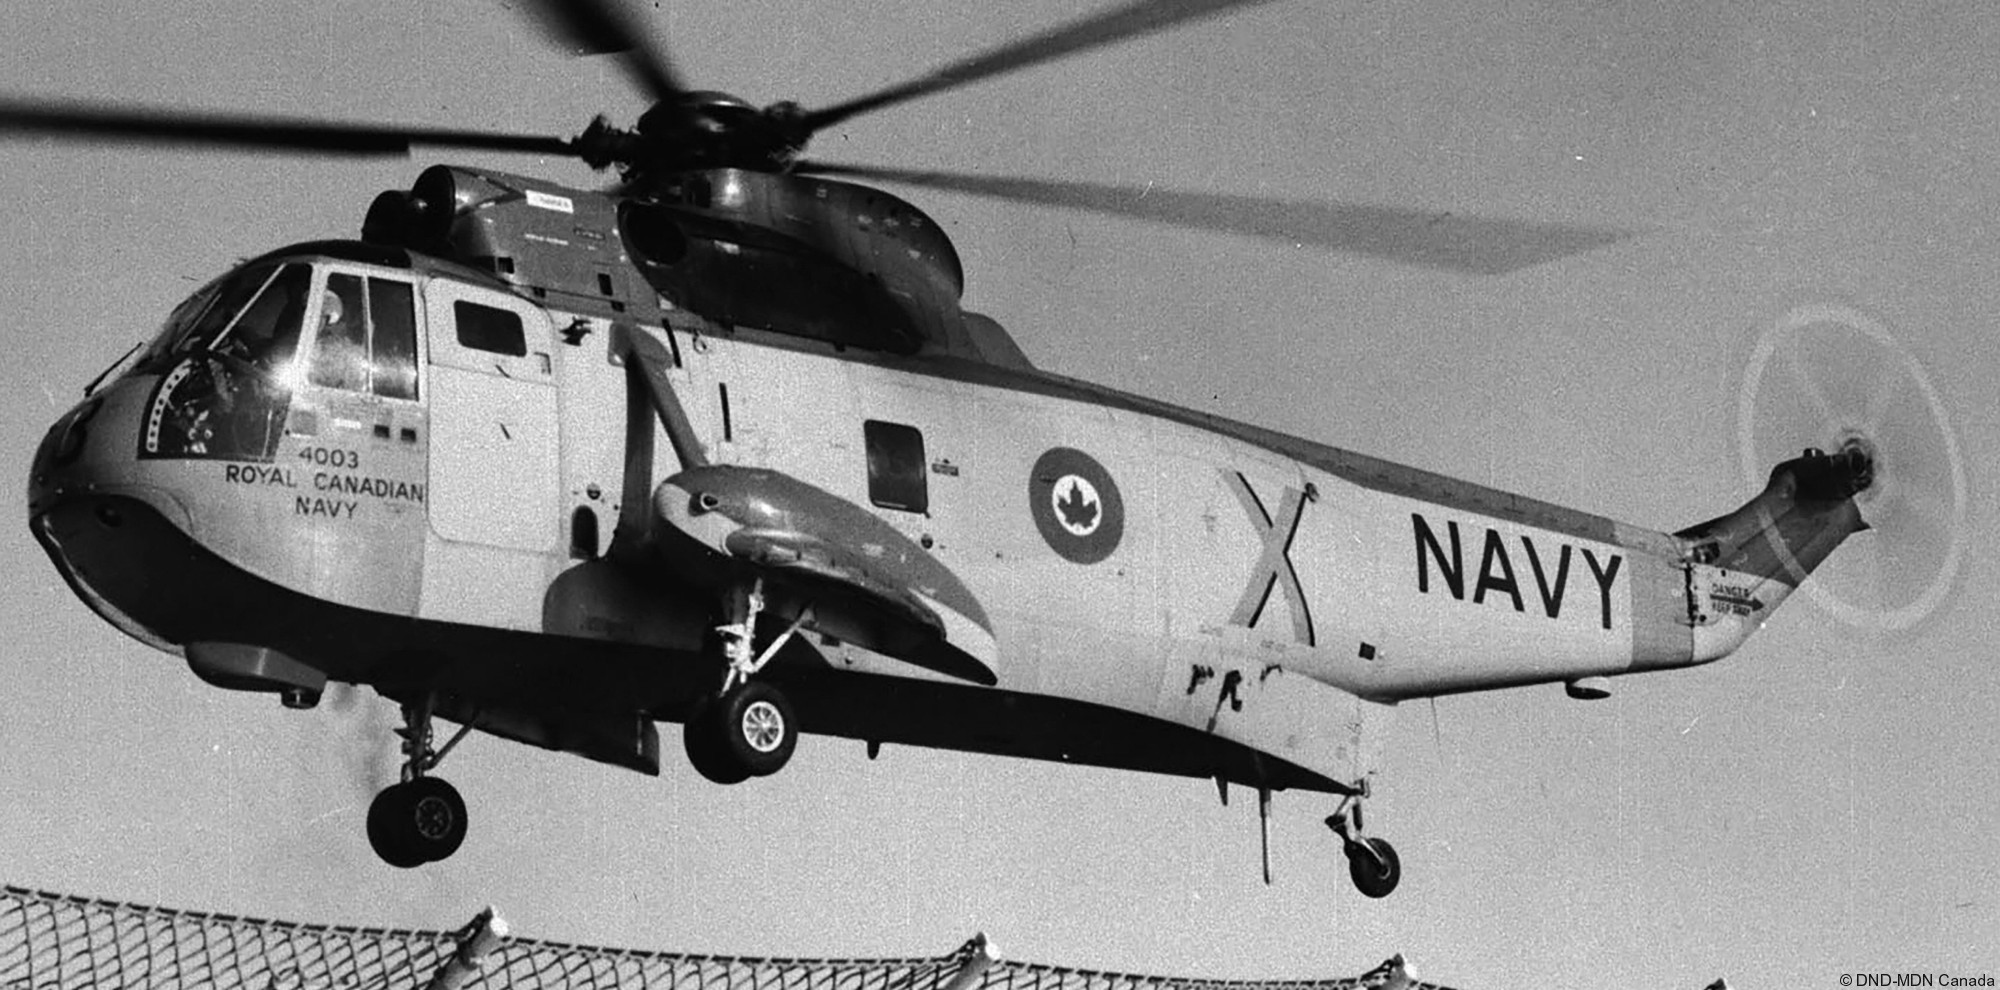 ch-124 sea king royal canadian navy sikorsky naval helicopter rcaf hmcs squadron 59